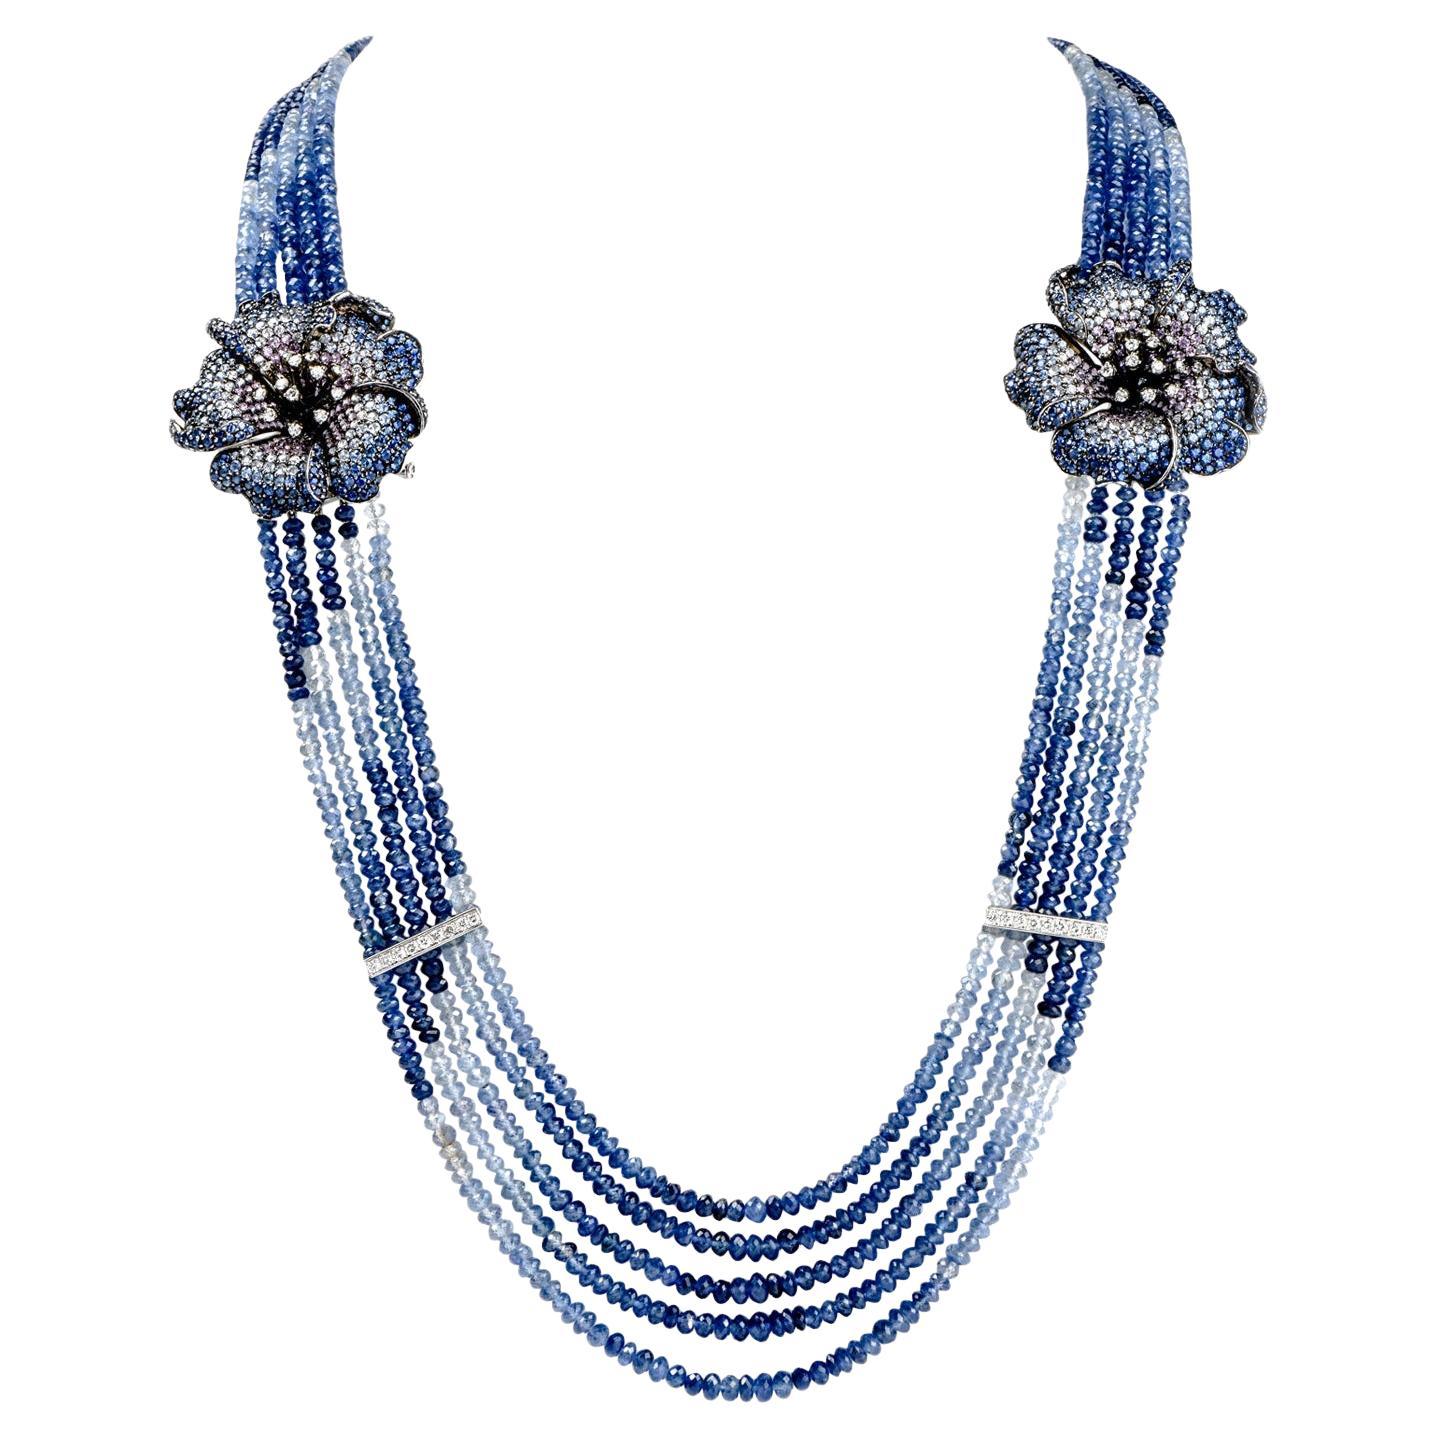  Diamond Sapphire Gold Multi-strand Bead Necklace and Double Flower Brooches For Sale